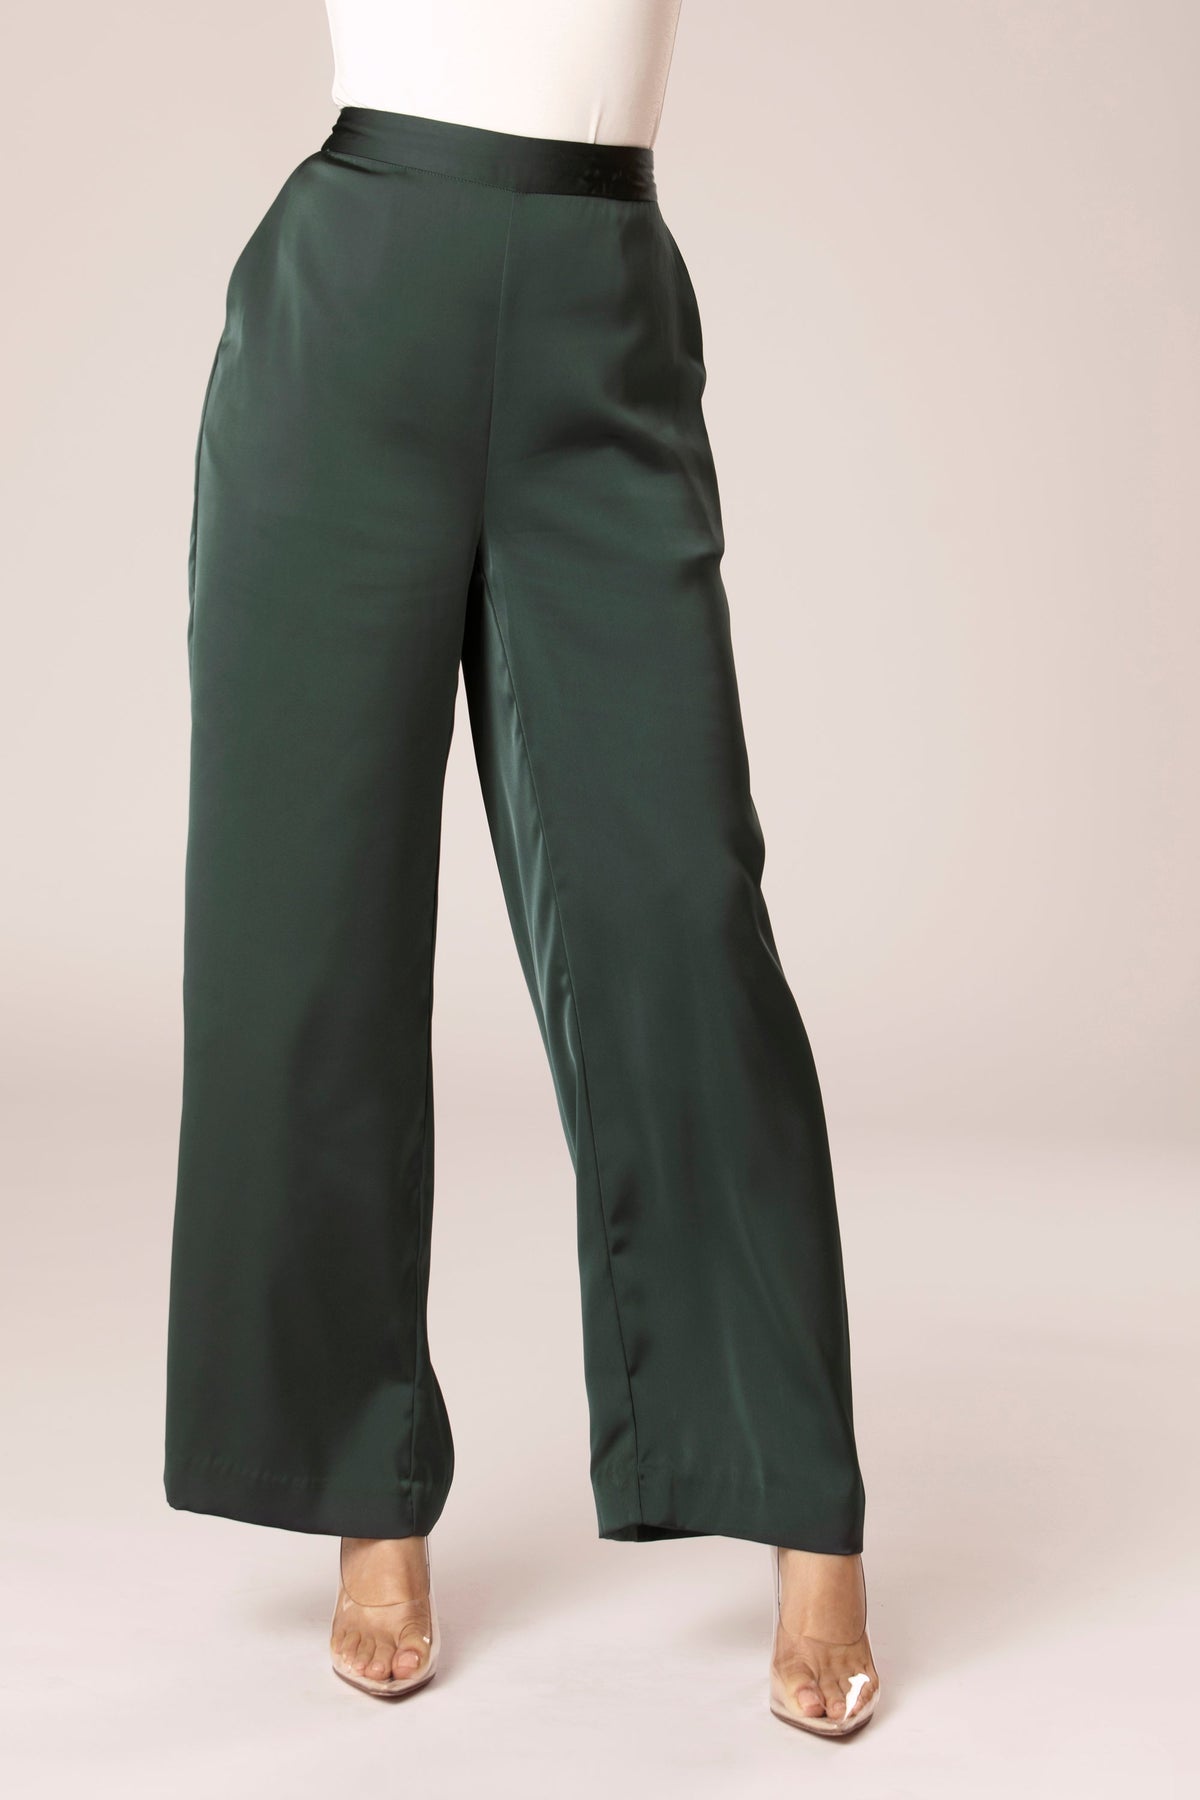 Dark Emerald Satin High Rise Trousers Veiled Collection 